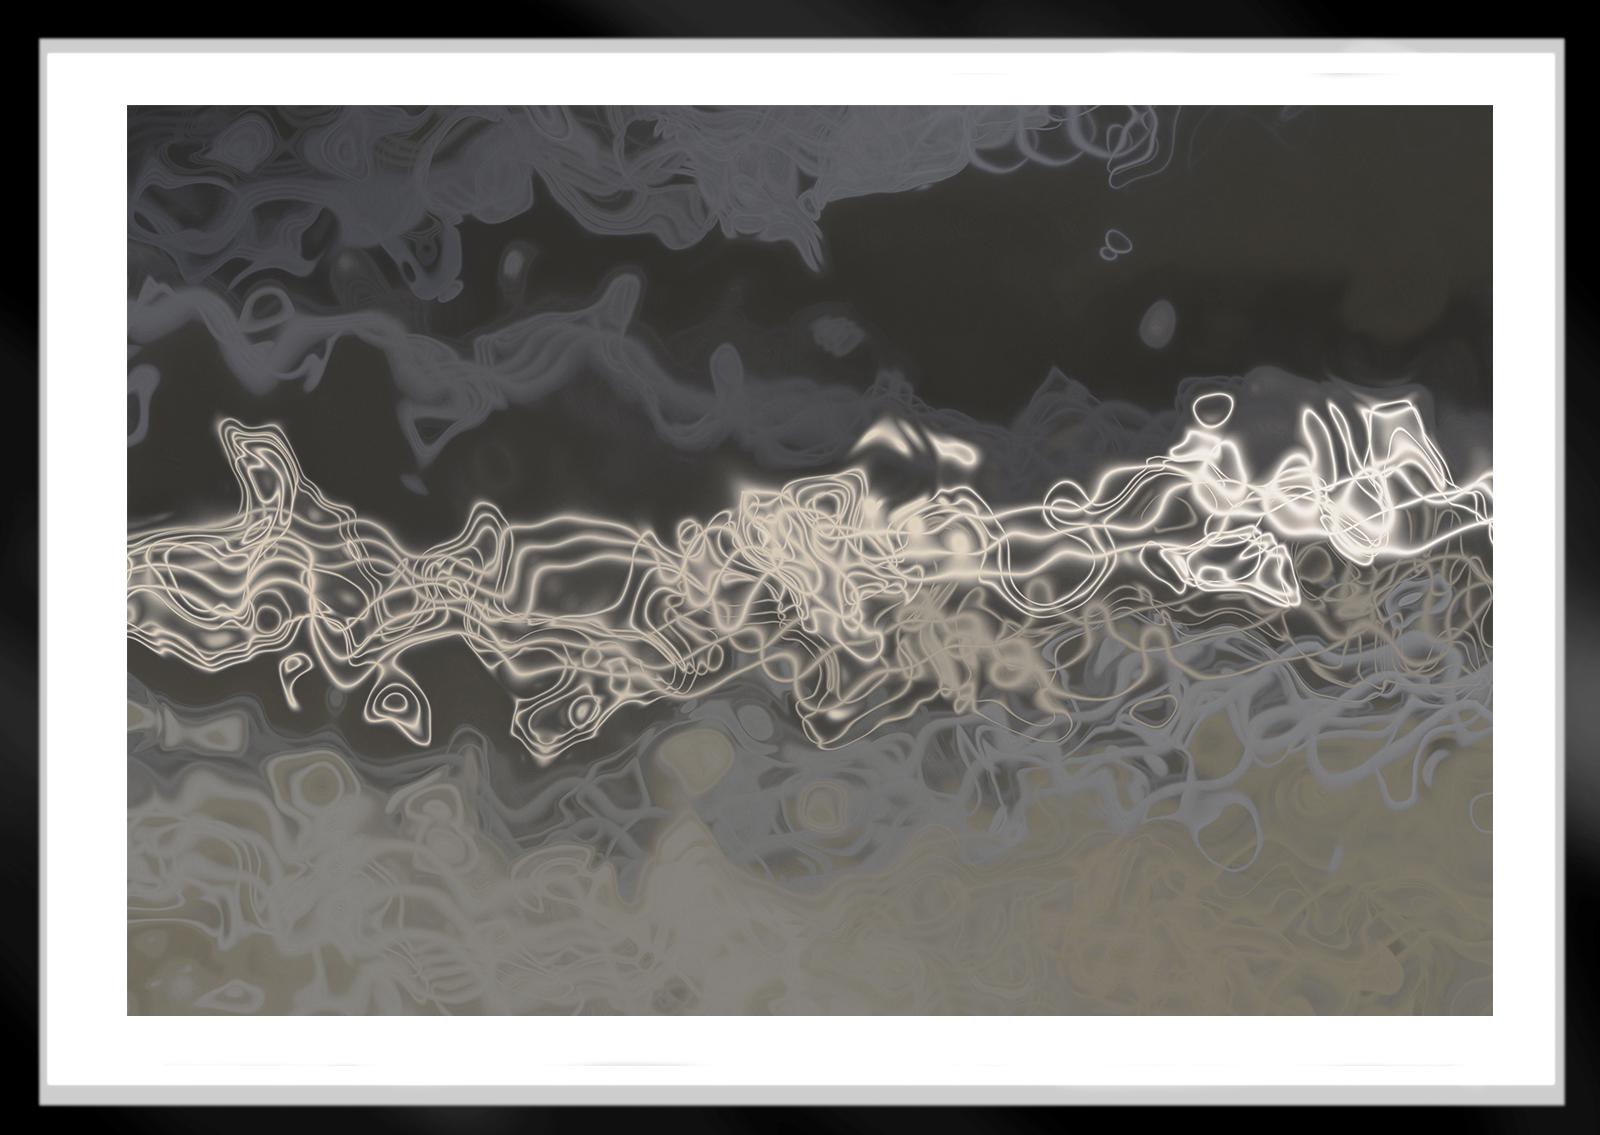 Earth Poem 3 - Signed limited edition pigment print, Color photography - Gray Abstract Photograph by Michael Banks